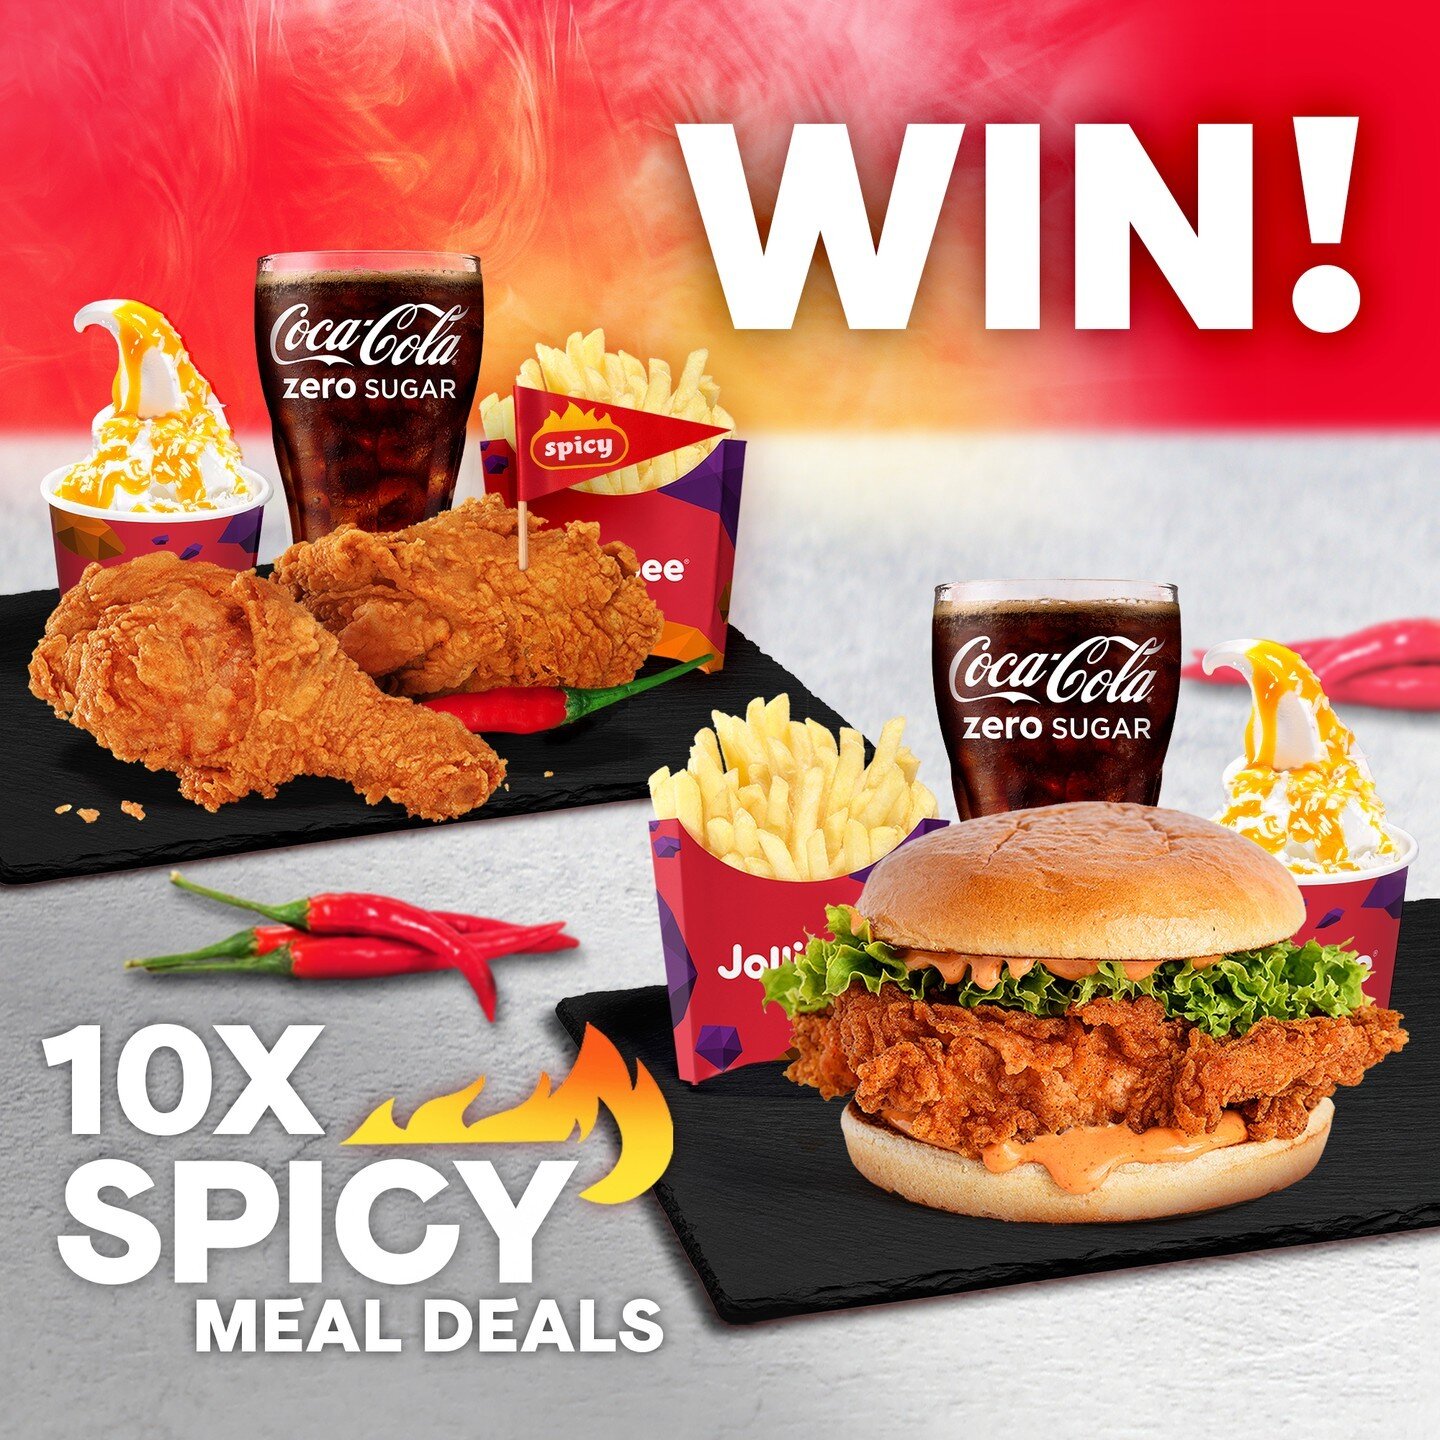 Does a feast of our NEW Spicy Meal Deals for you and your mates sound good?

We are giving three lucky winners TEN Spicy Meal Deals each (that's ten Sundaes, ten drinks, ten lots of fries, AND ten Spicy Chicken Sandwiches or 2pc Chickenjoy). The most